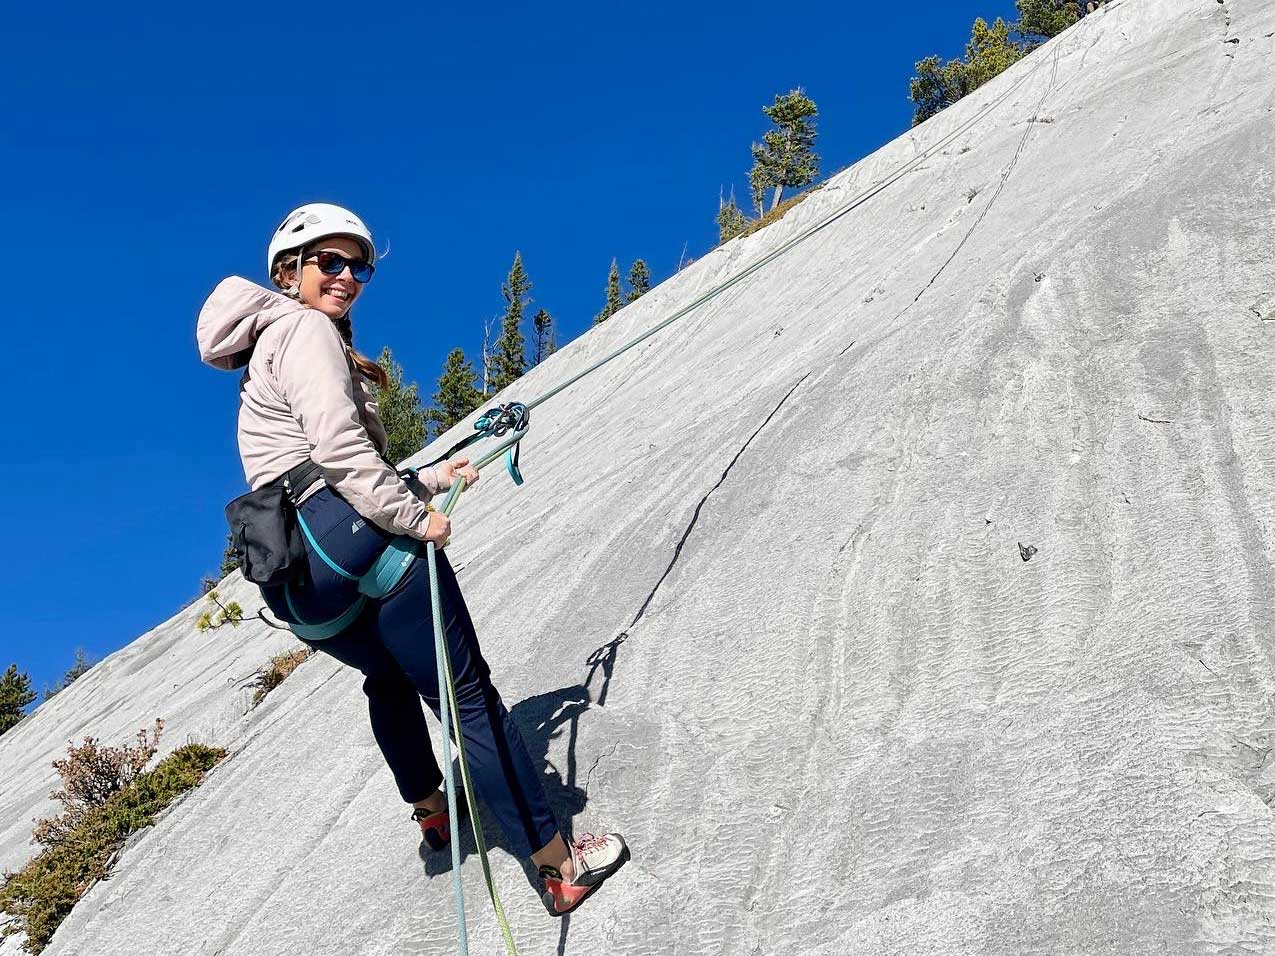 Woman repelling down a mountain face in the alberta rockies